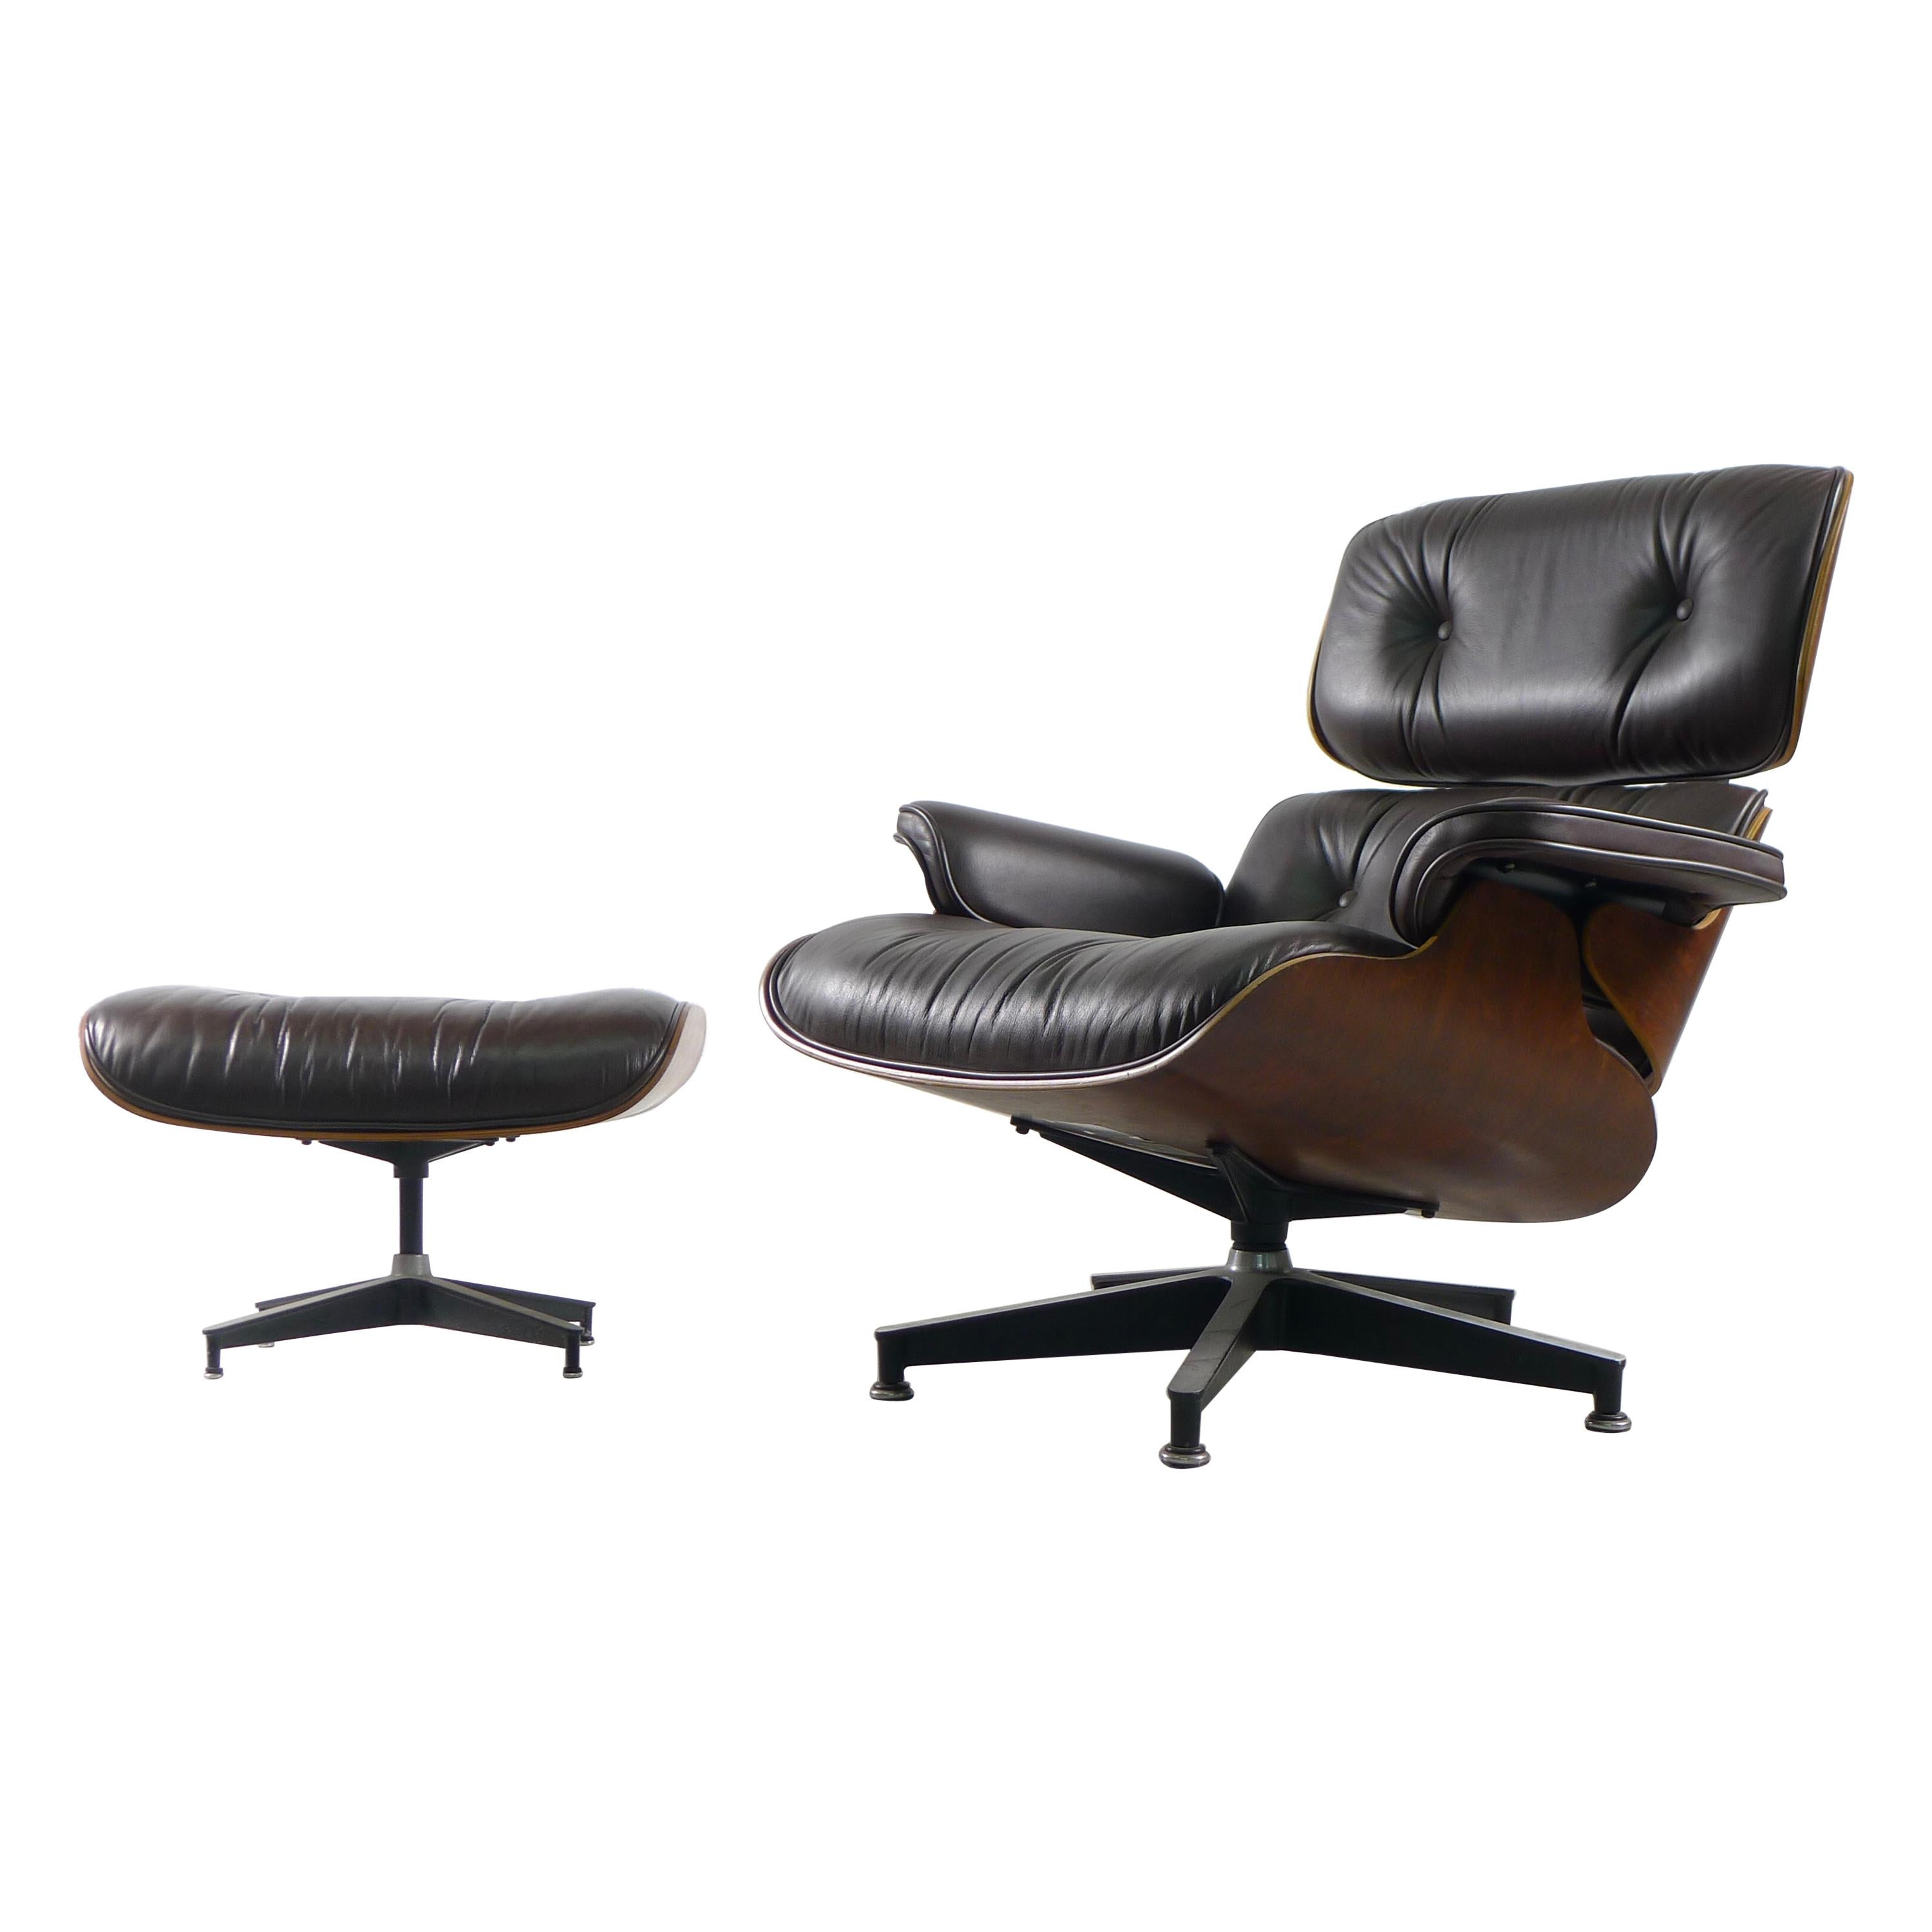 Charles and Ray Eames, Rosewood Lounge Chair and Ottoman, Herman Miller, USA